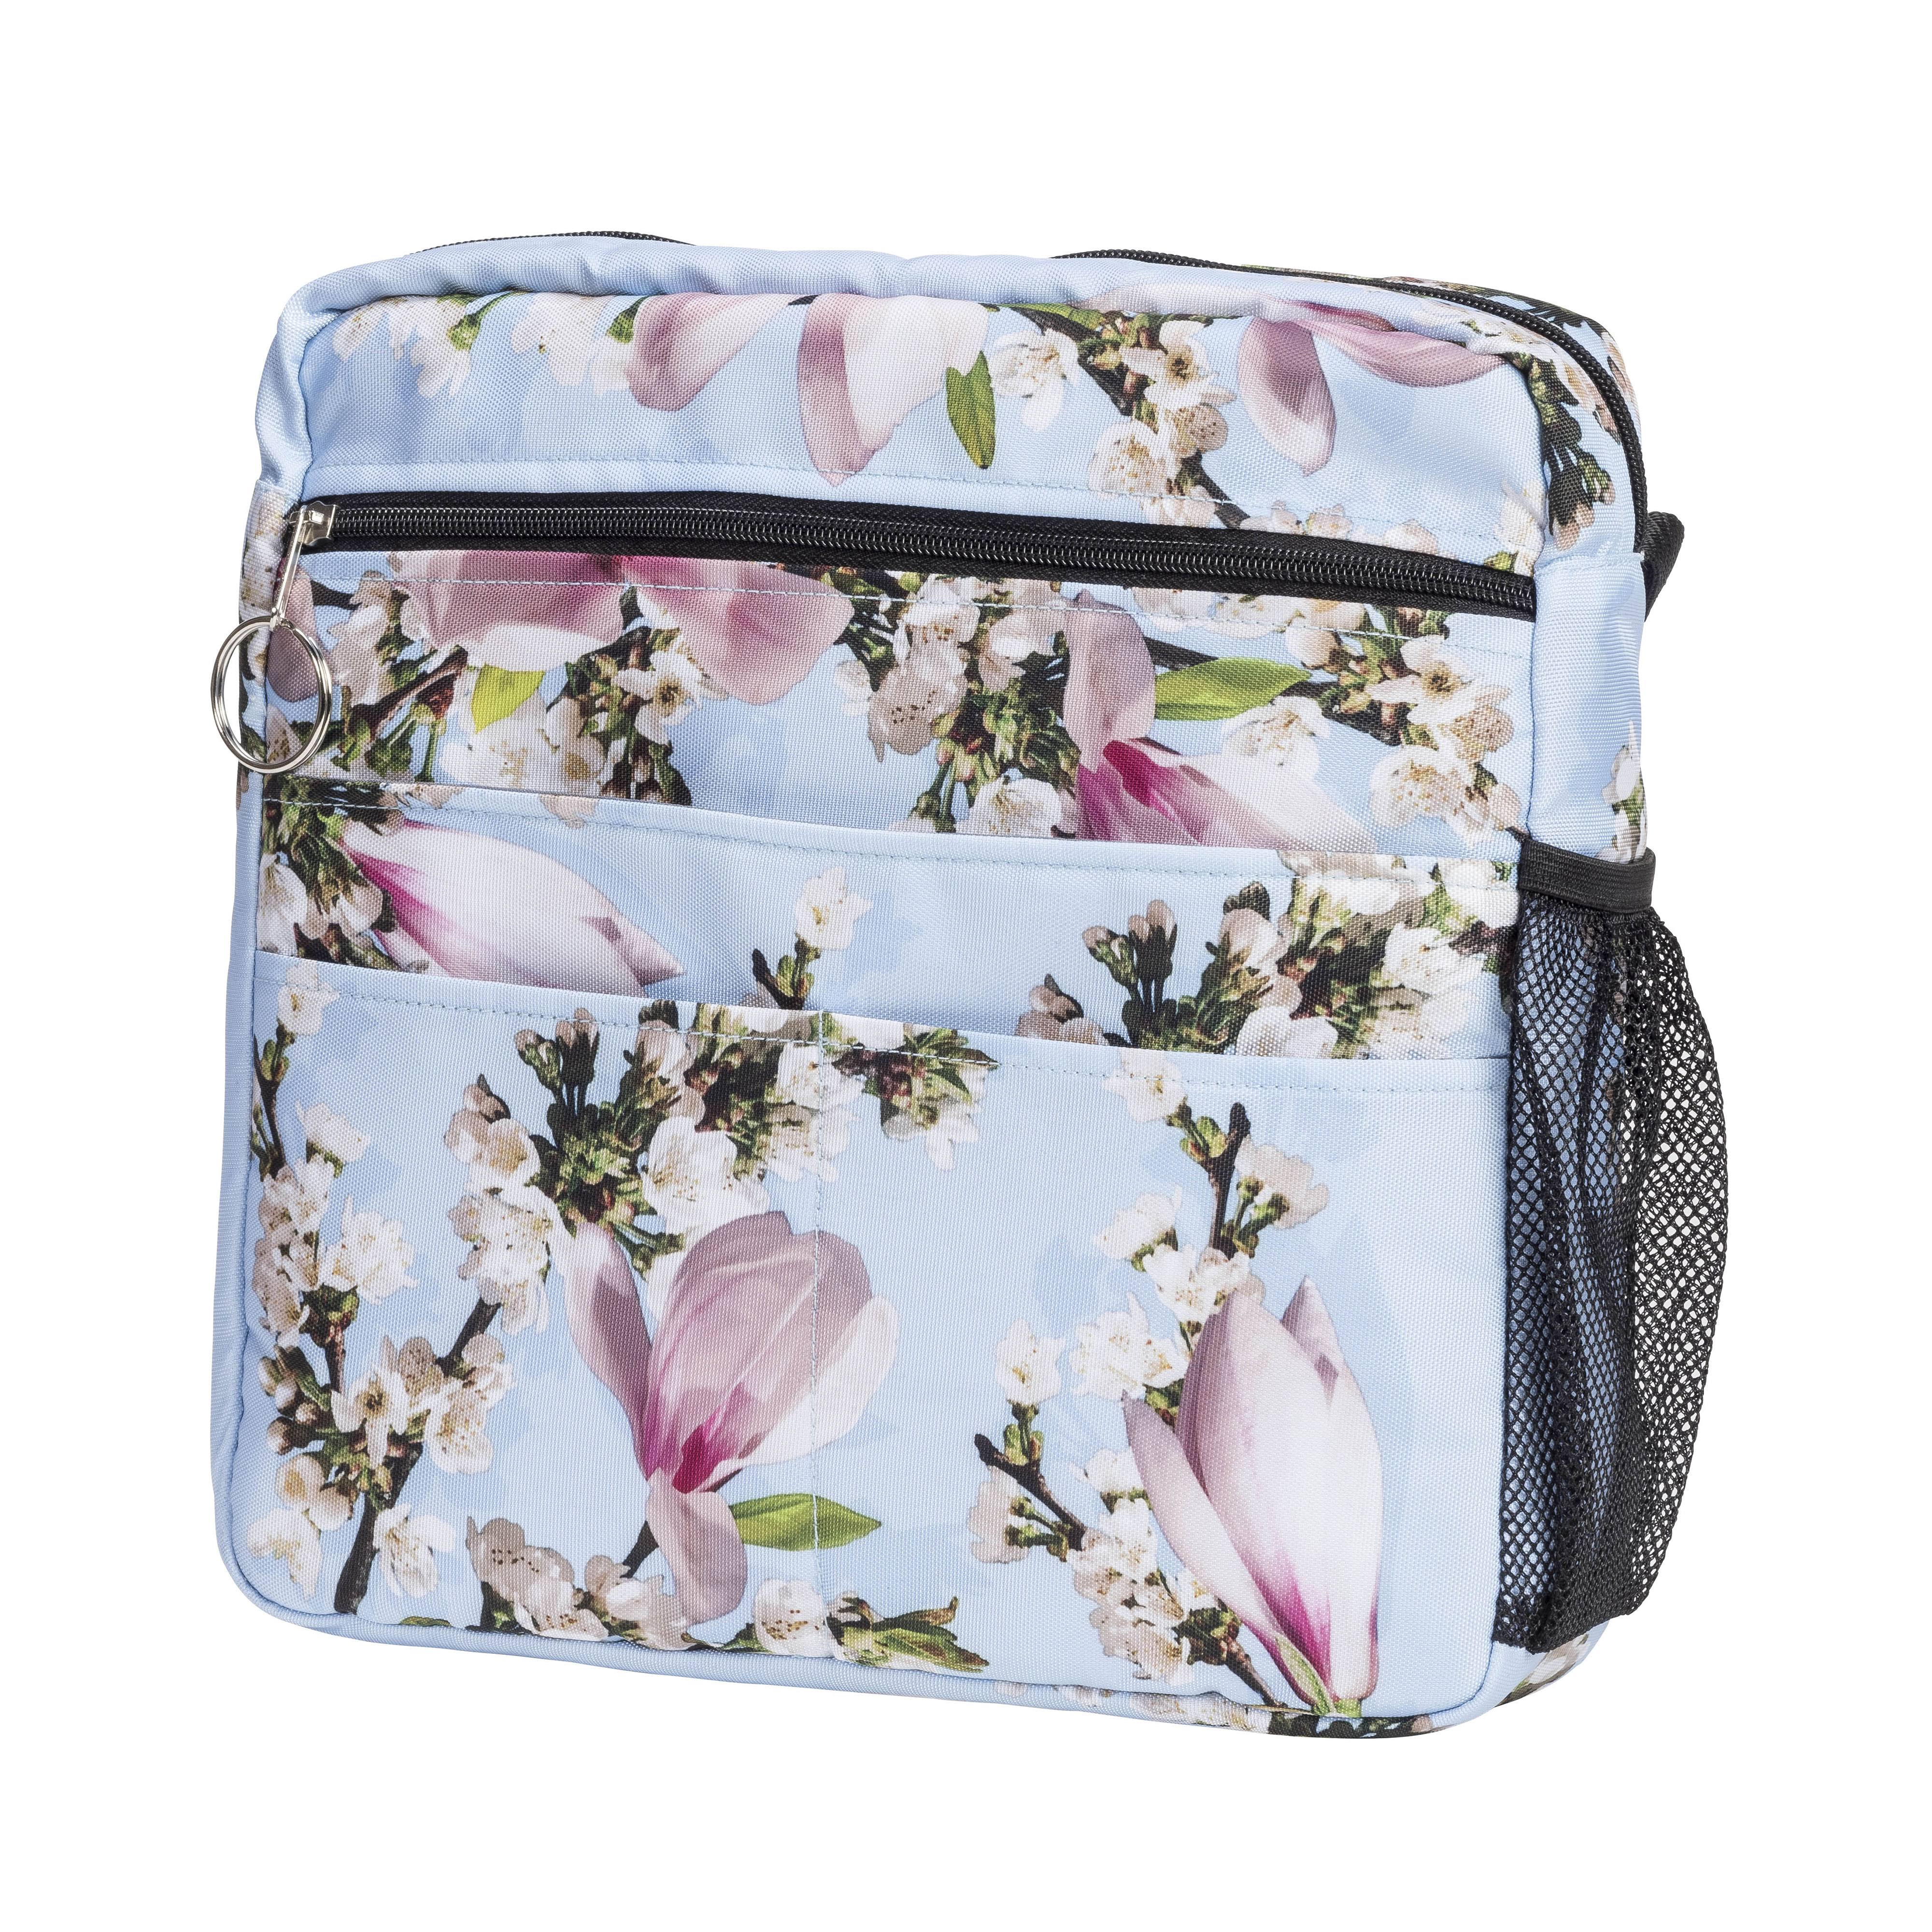 Drive Medical Accessory Tote Bag, Blue Floral